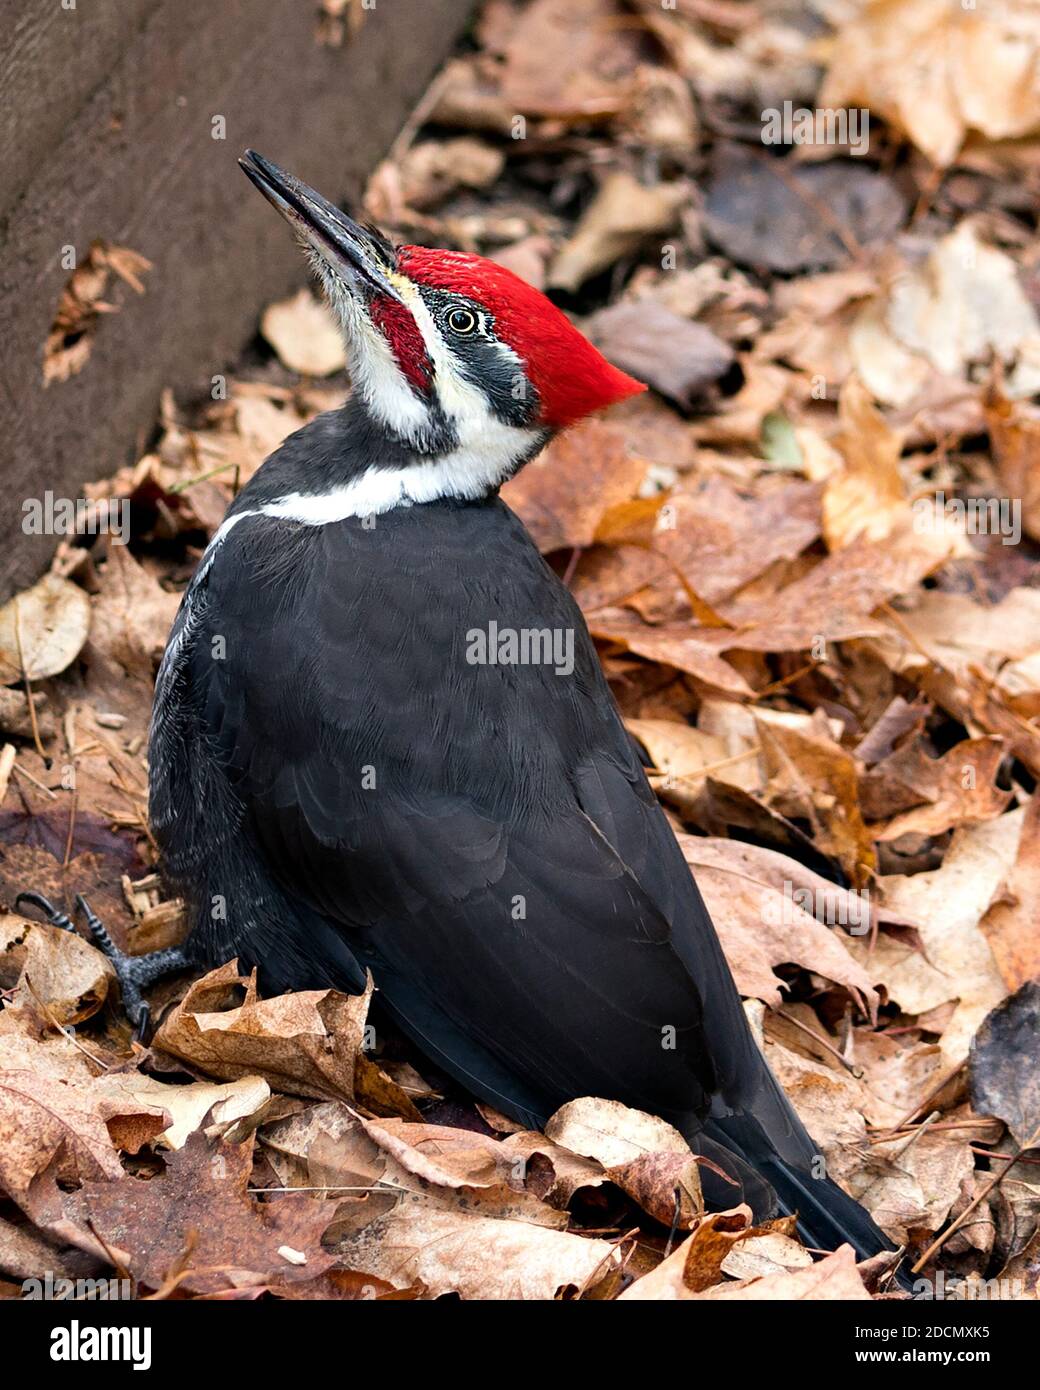 Woodpecker bird close-up profile view with a brown leaves background in its environment and habitat. Woodpecker stock photos. Image. Picture. Portrait. Stock Photo